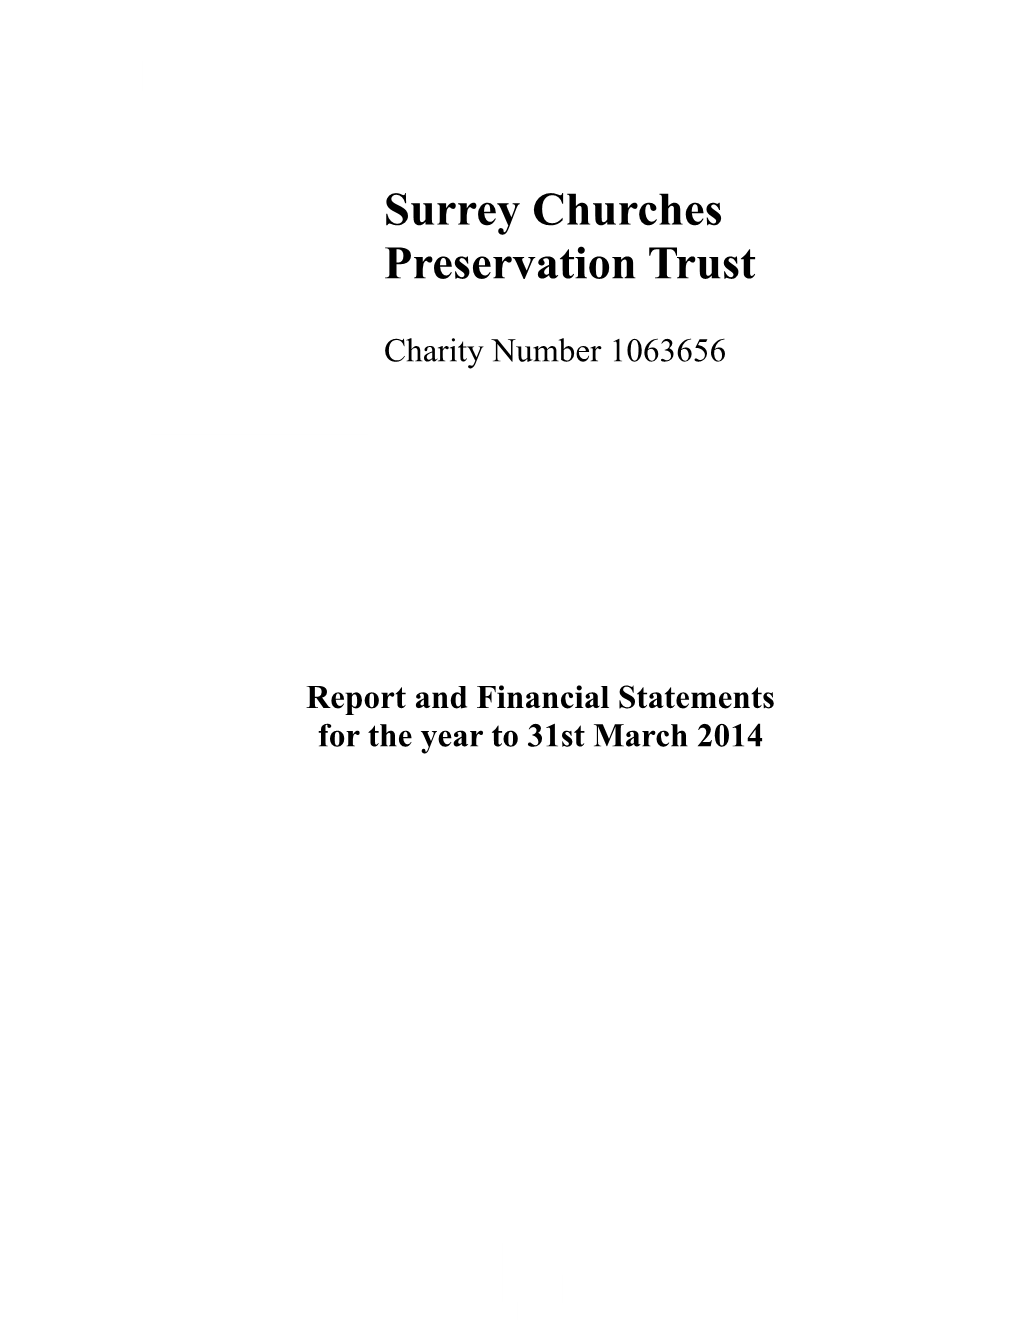 The Surrey Churches Preservation Trust